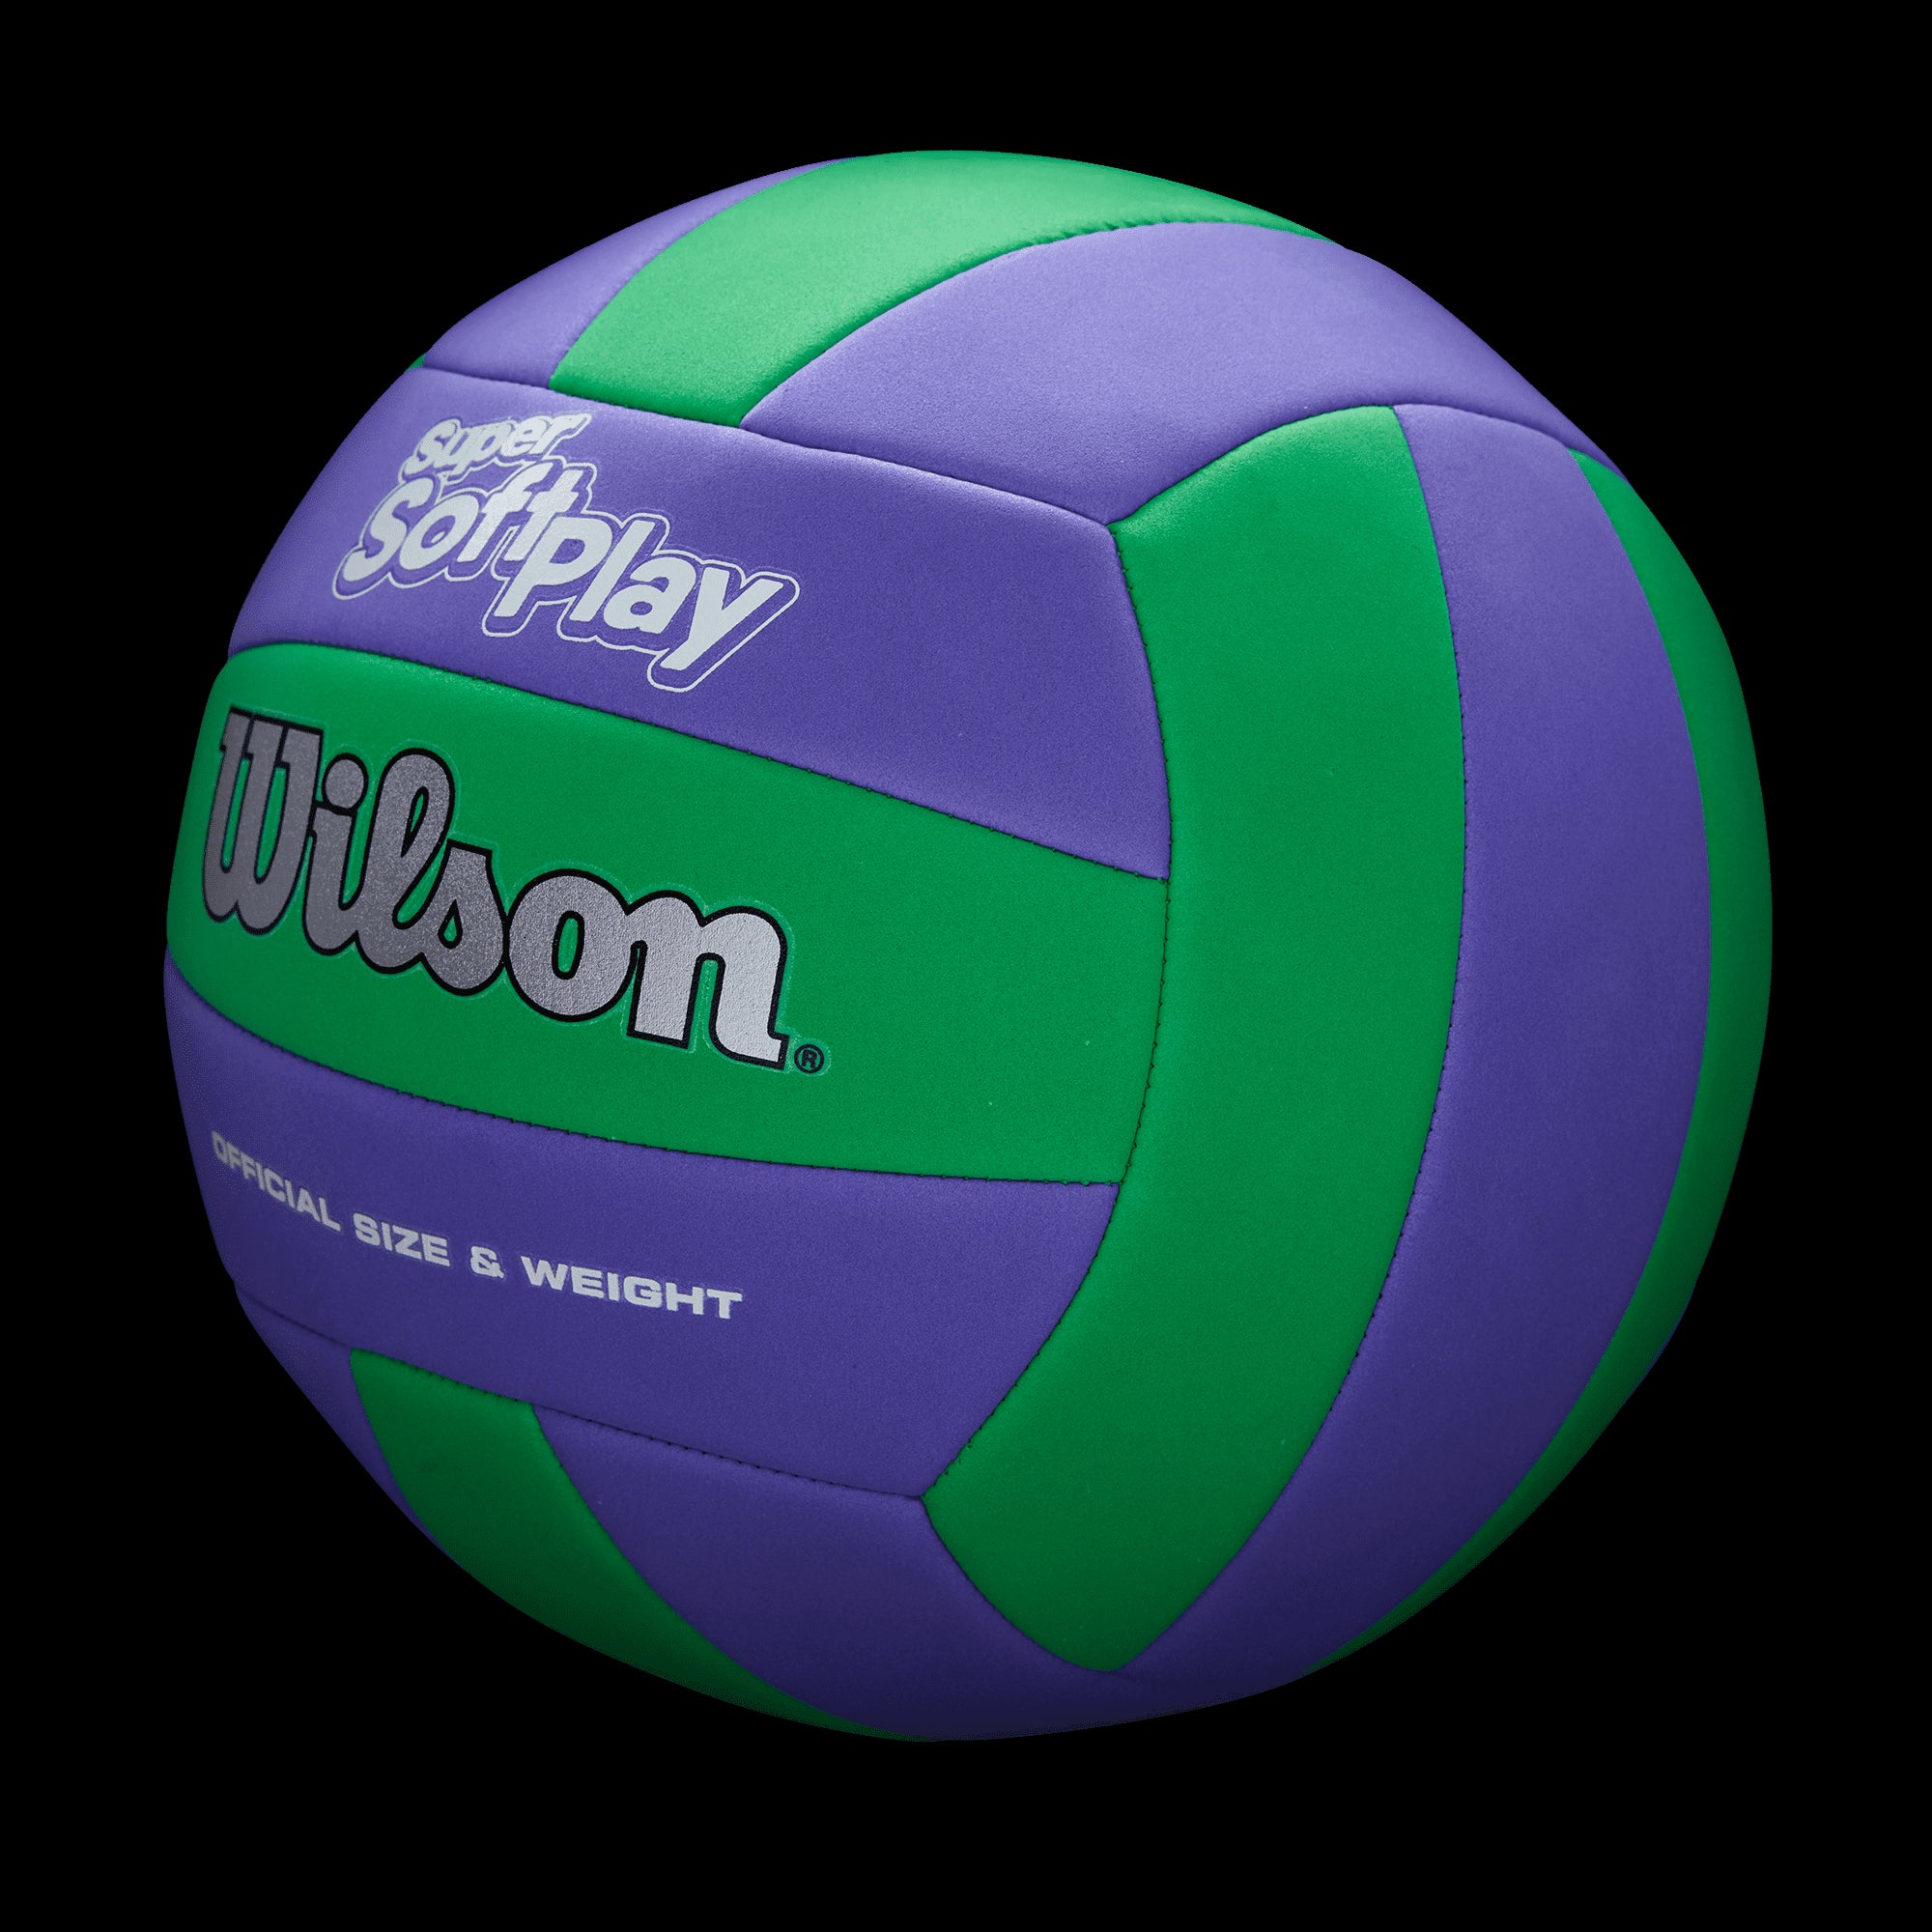 Wilson Super Soft Play Volleyball Official Size, Green and Purple